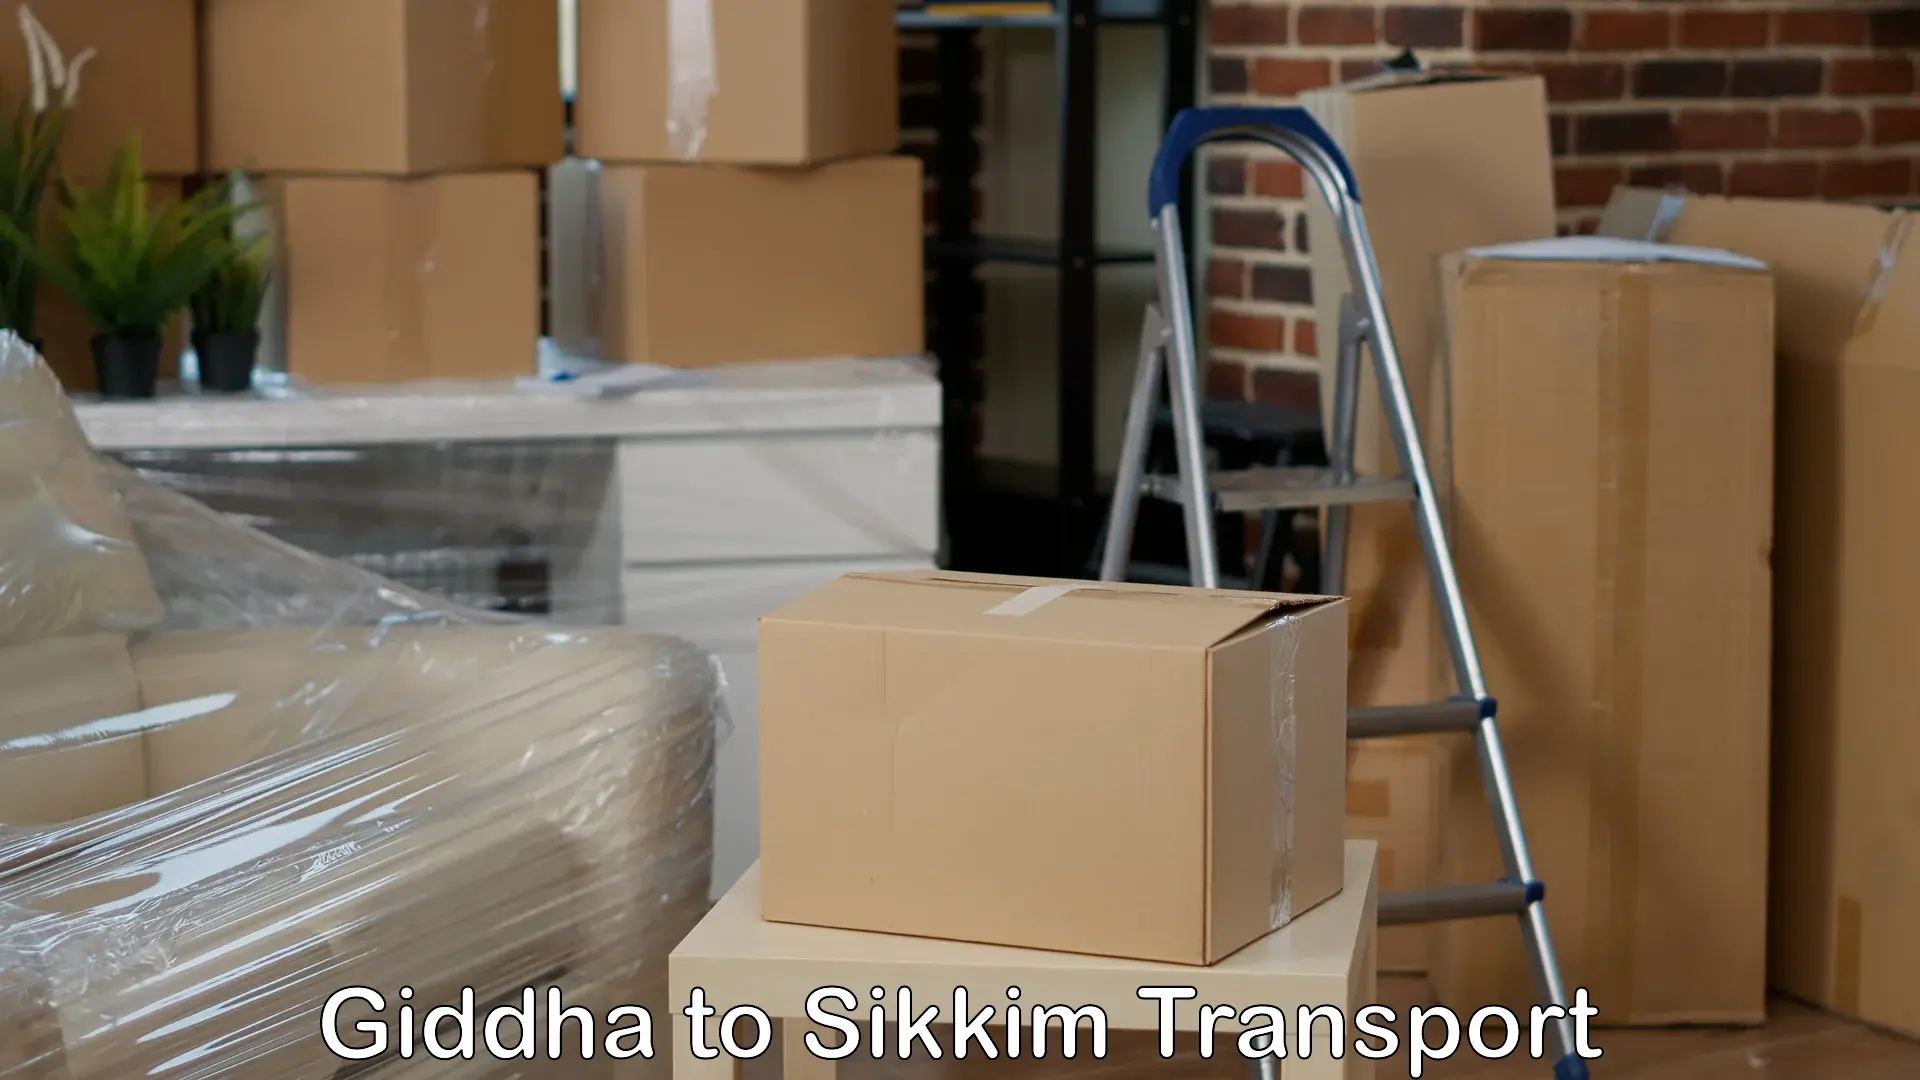 Shipping services Giddha to Pelling